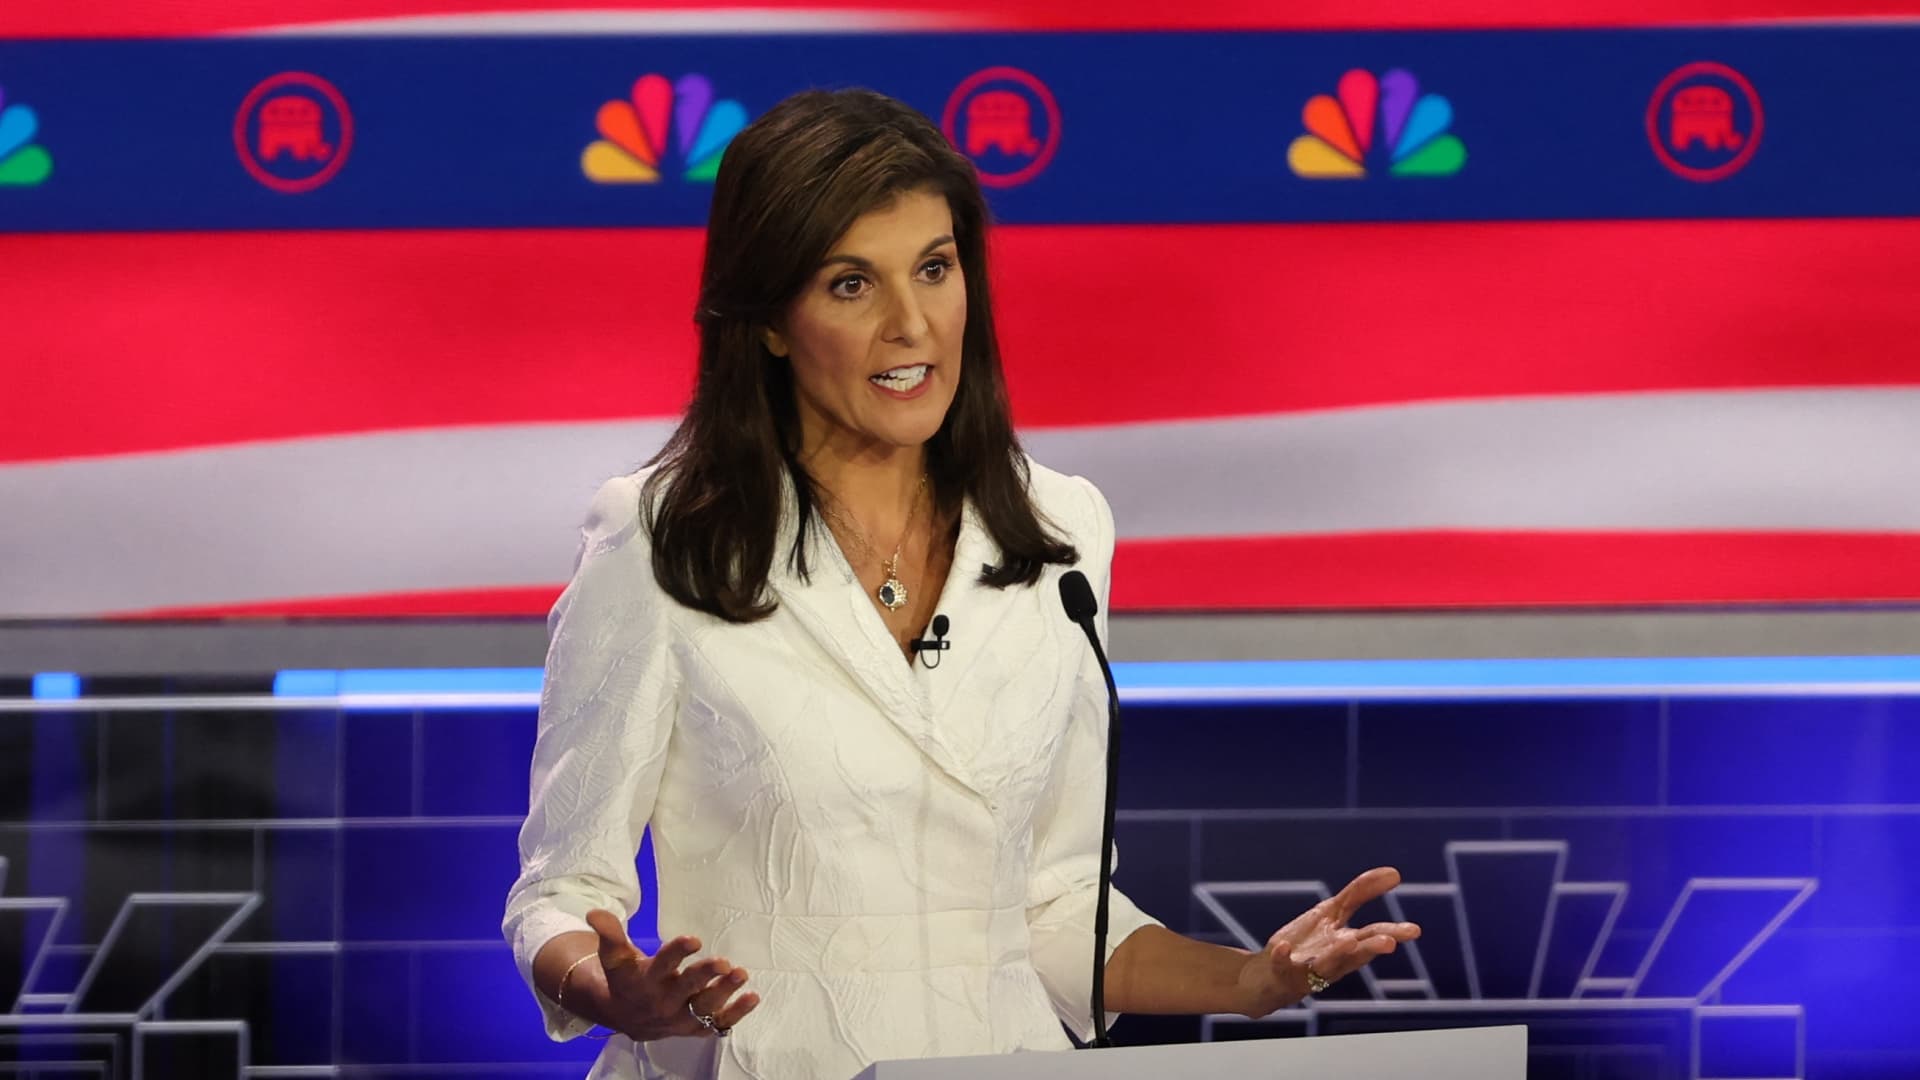 Former South Carolina Governor Nikki Haley speaks at the third Republican candidates' U.S. presidential debate of the 2024 U.S. presidential campaign hosted by NBC News at the Adrienne Arsht Center for the Performing Arts in Miami, Florida, U.S., November 8, 2023. 